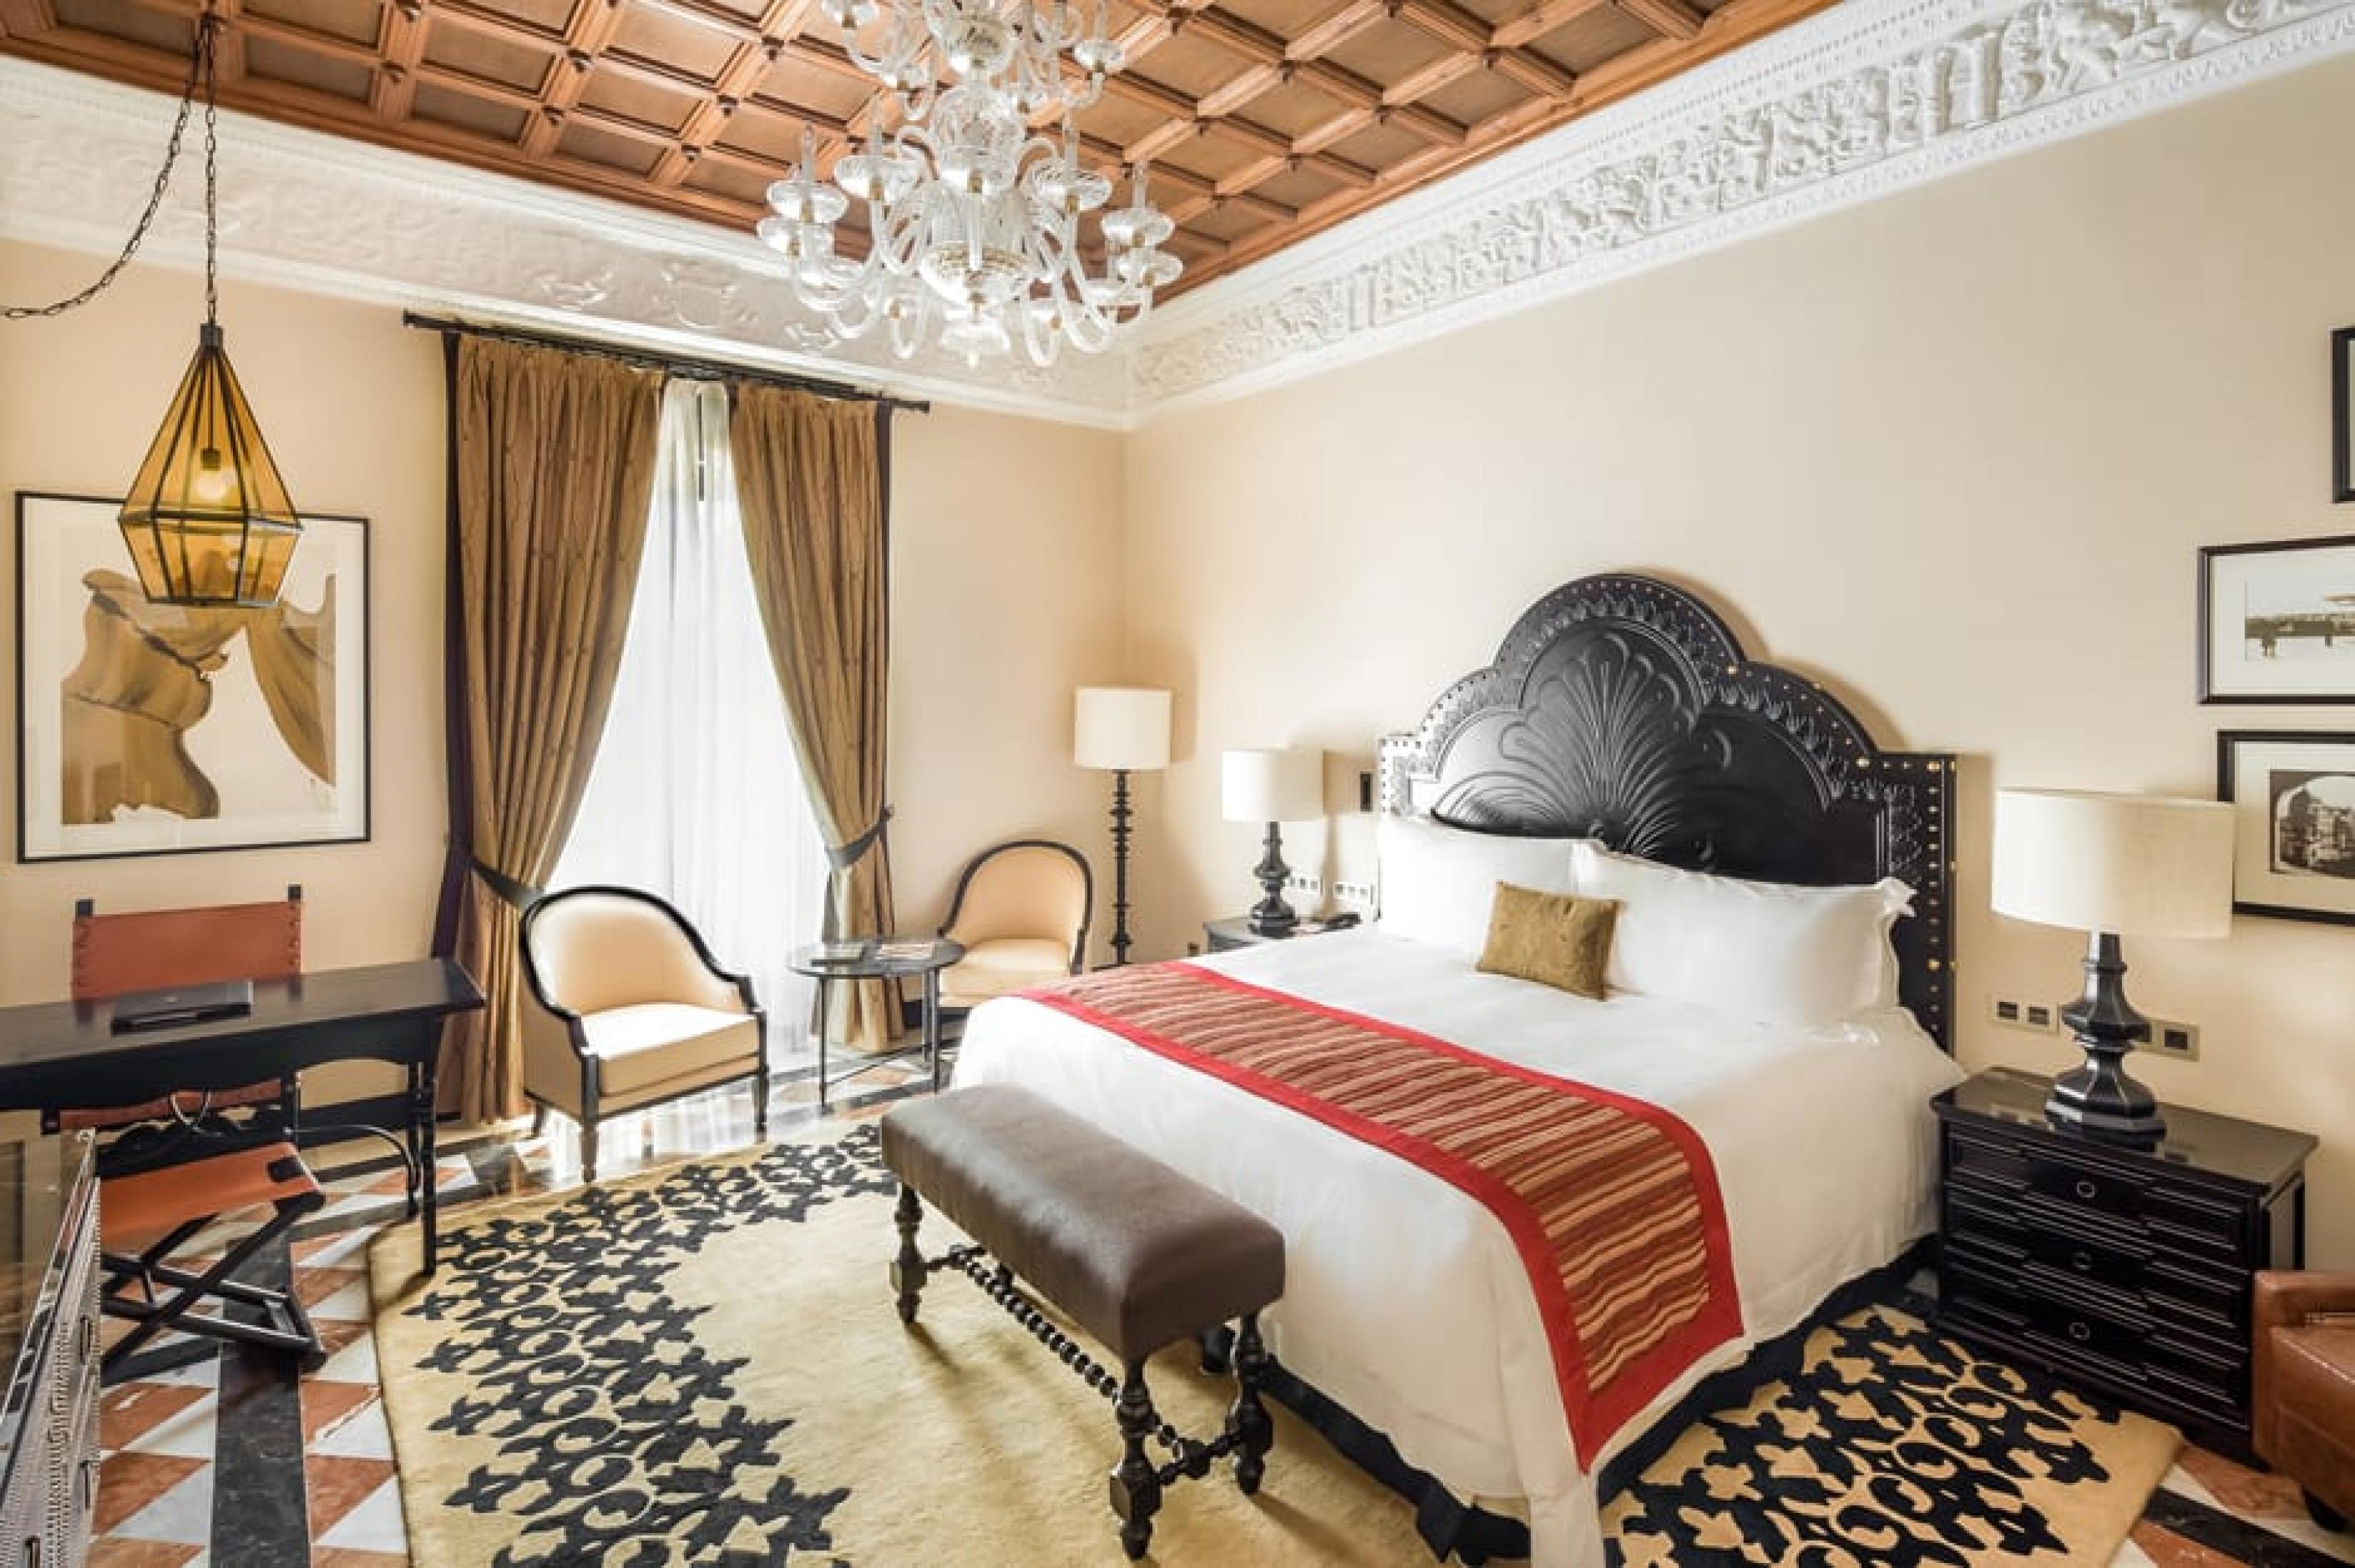 Suite at Hotel Alfonso XIII, Seville, Spain